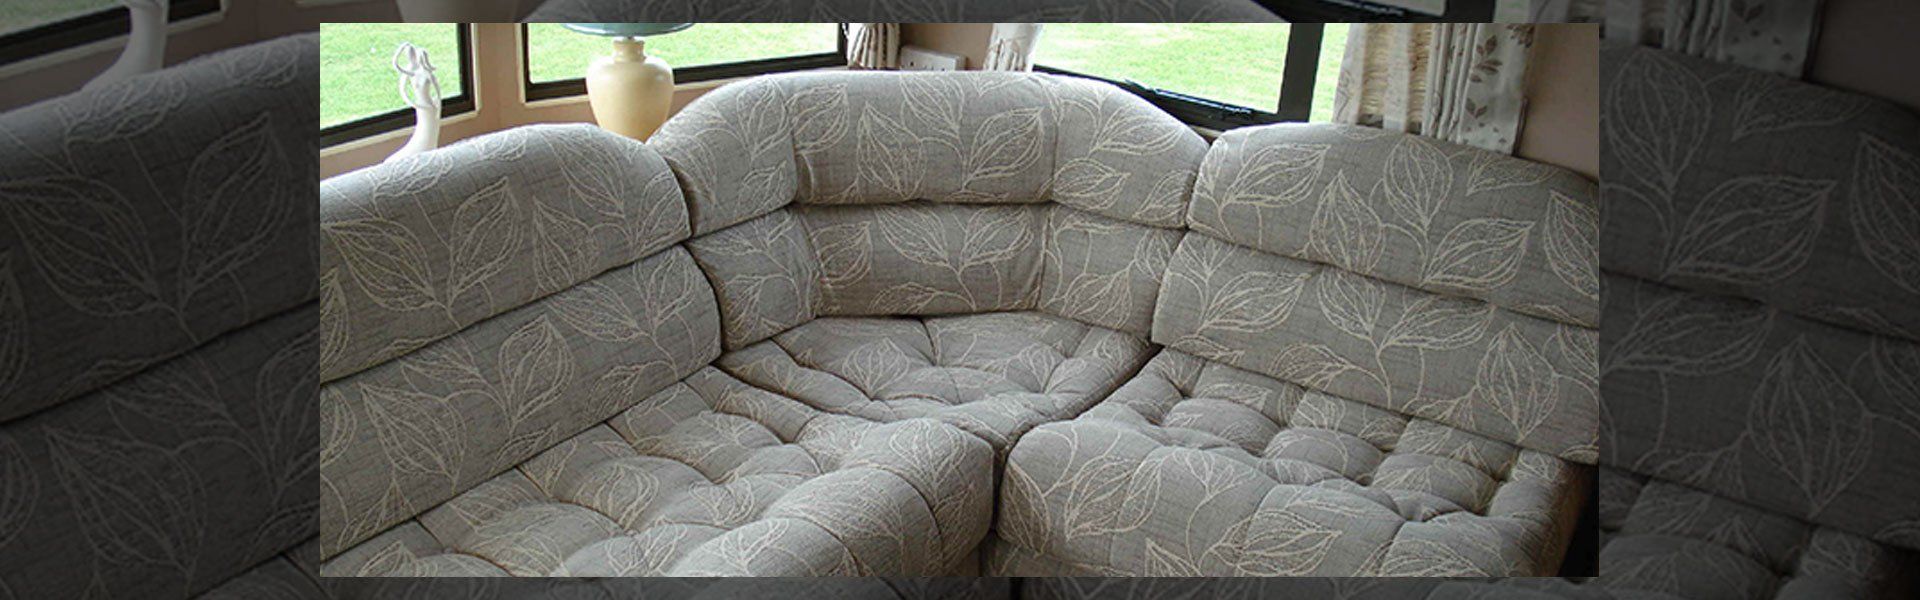 Contact Troon Upholstery Service today